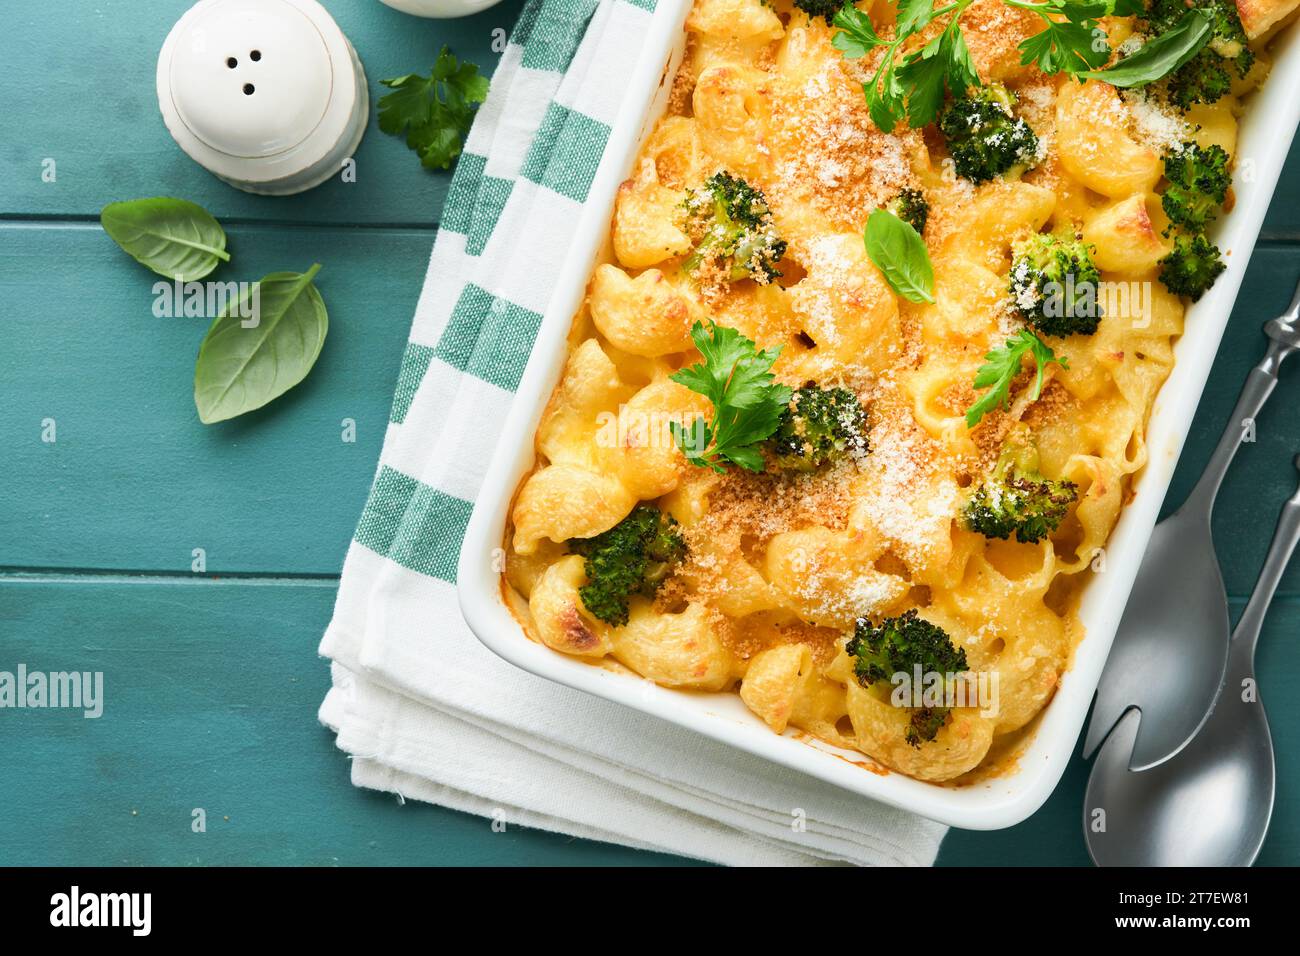 Pasta Broccoli casserole. Baked Mac and cheese with broccoli, cream sauce and parmesan on old rustic wooden background. Healthy or baby food. American Stock Photo